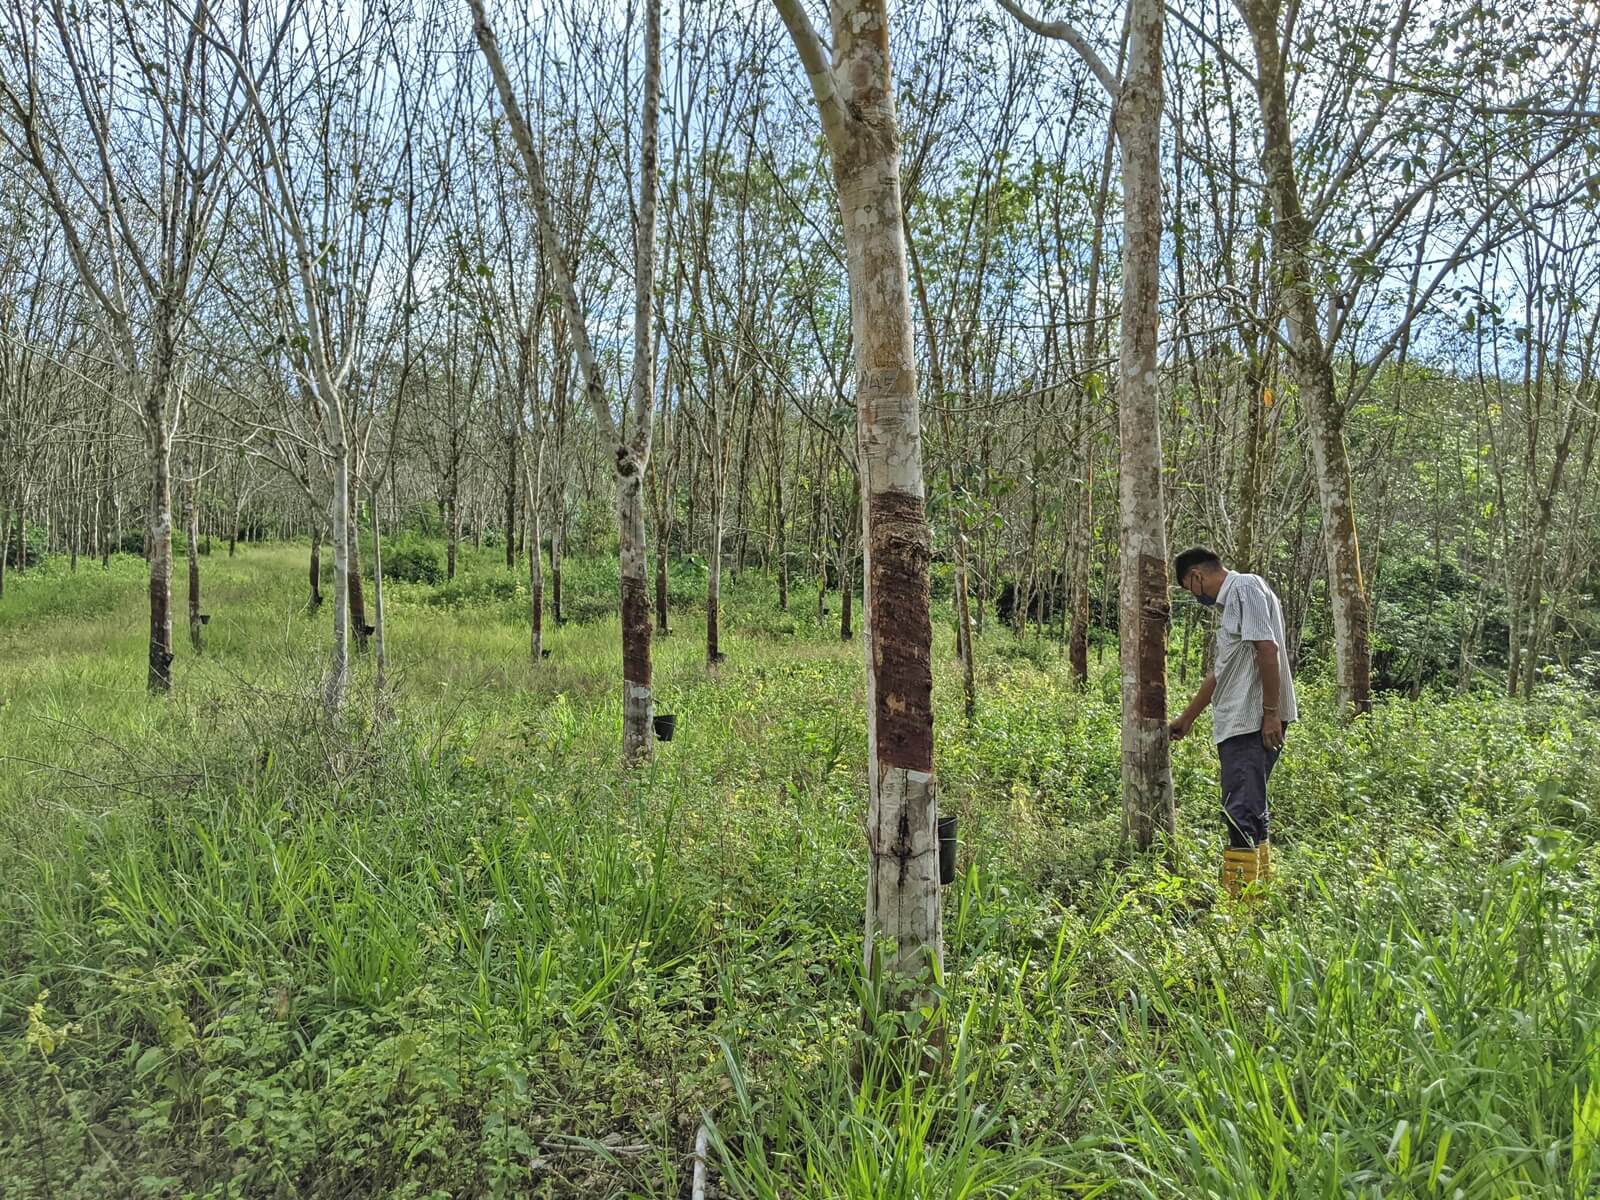 This rubber forest plantation is too weedy and could harbour pests like termites and snakes. But many planters lack the workers to keep their fields clean. (YH Law)